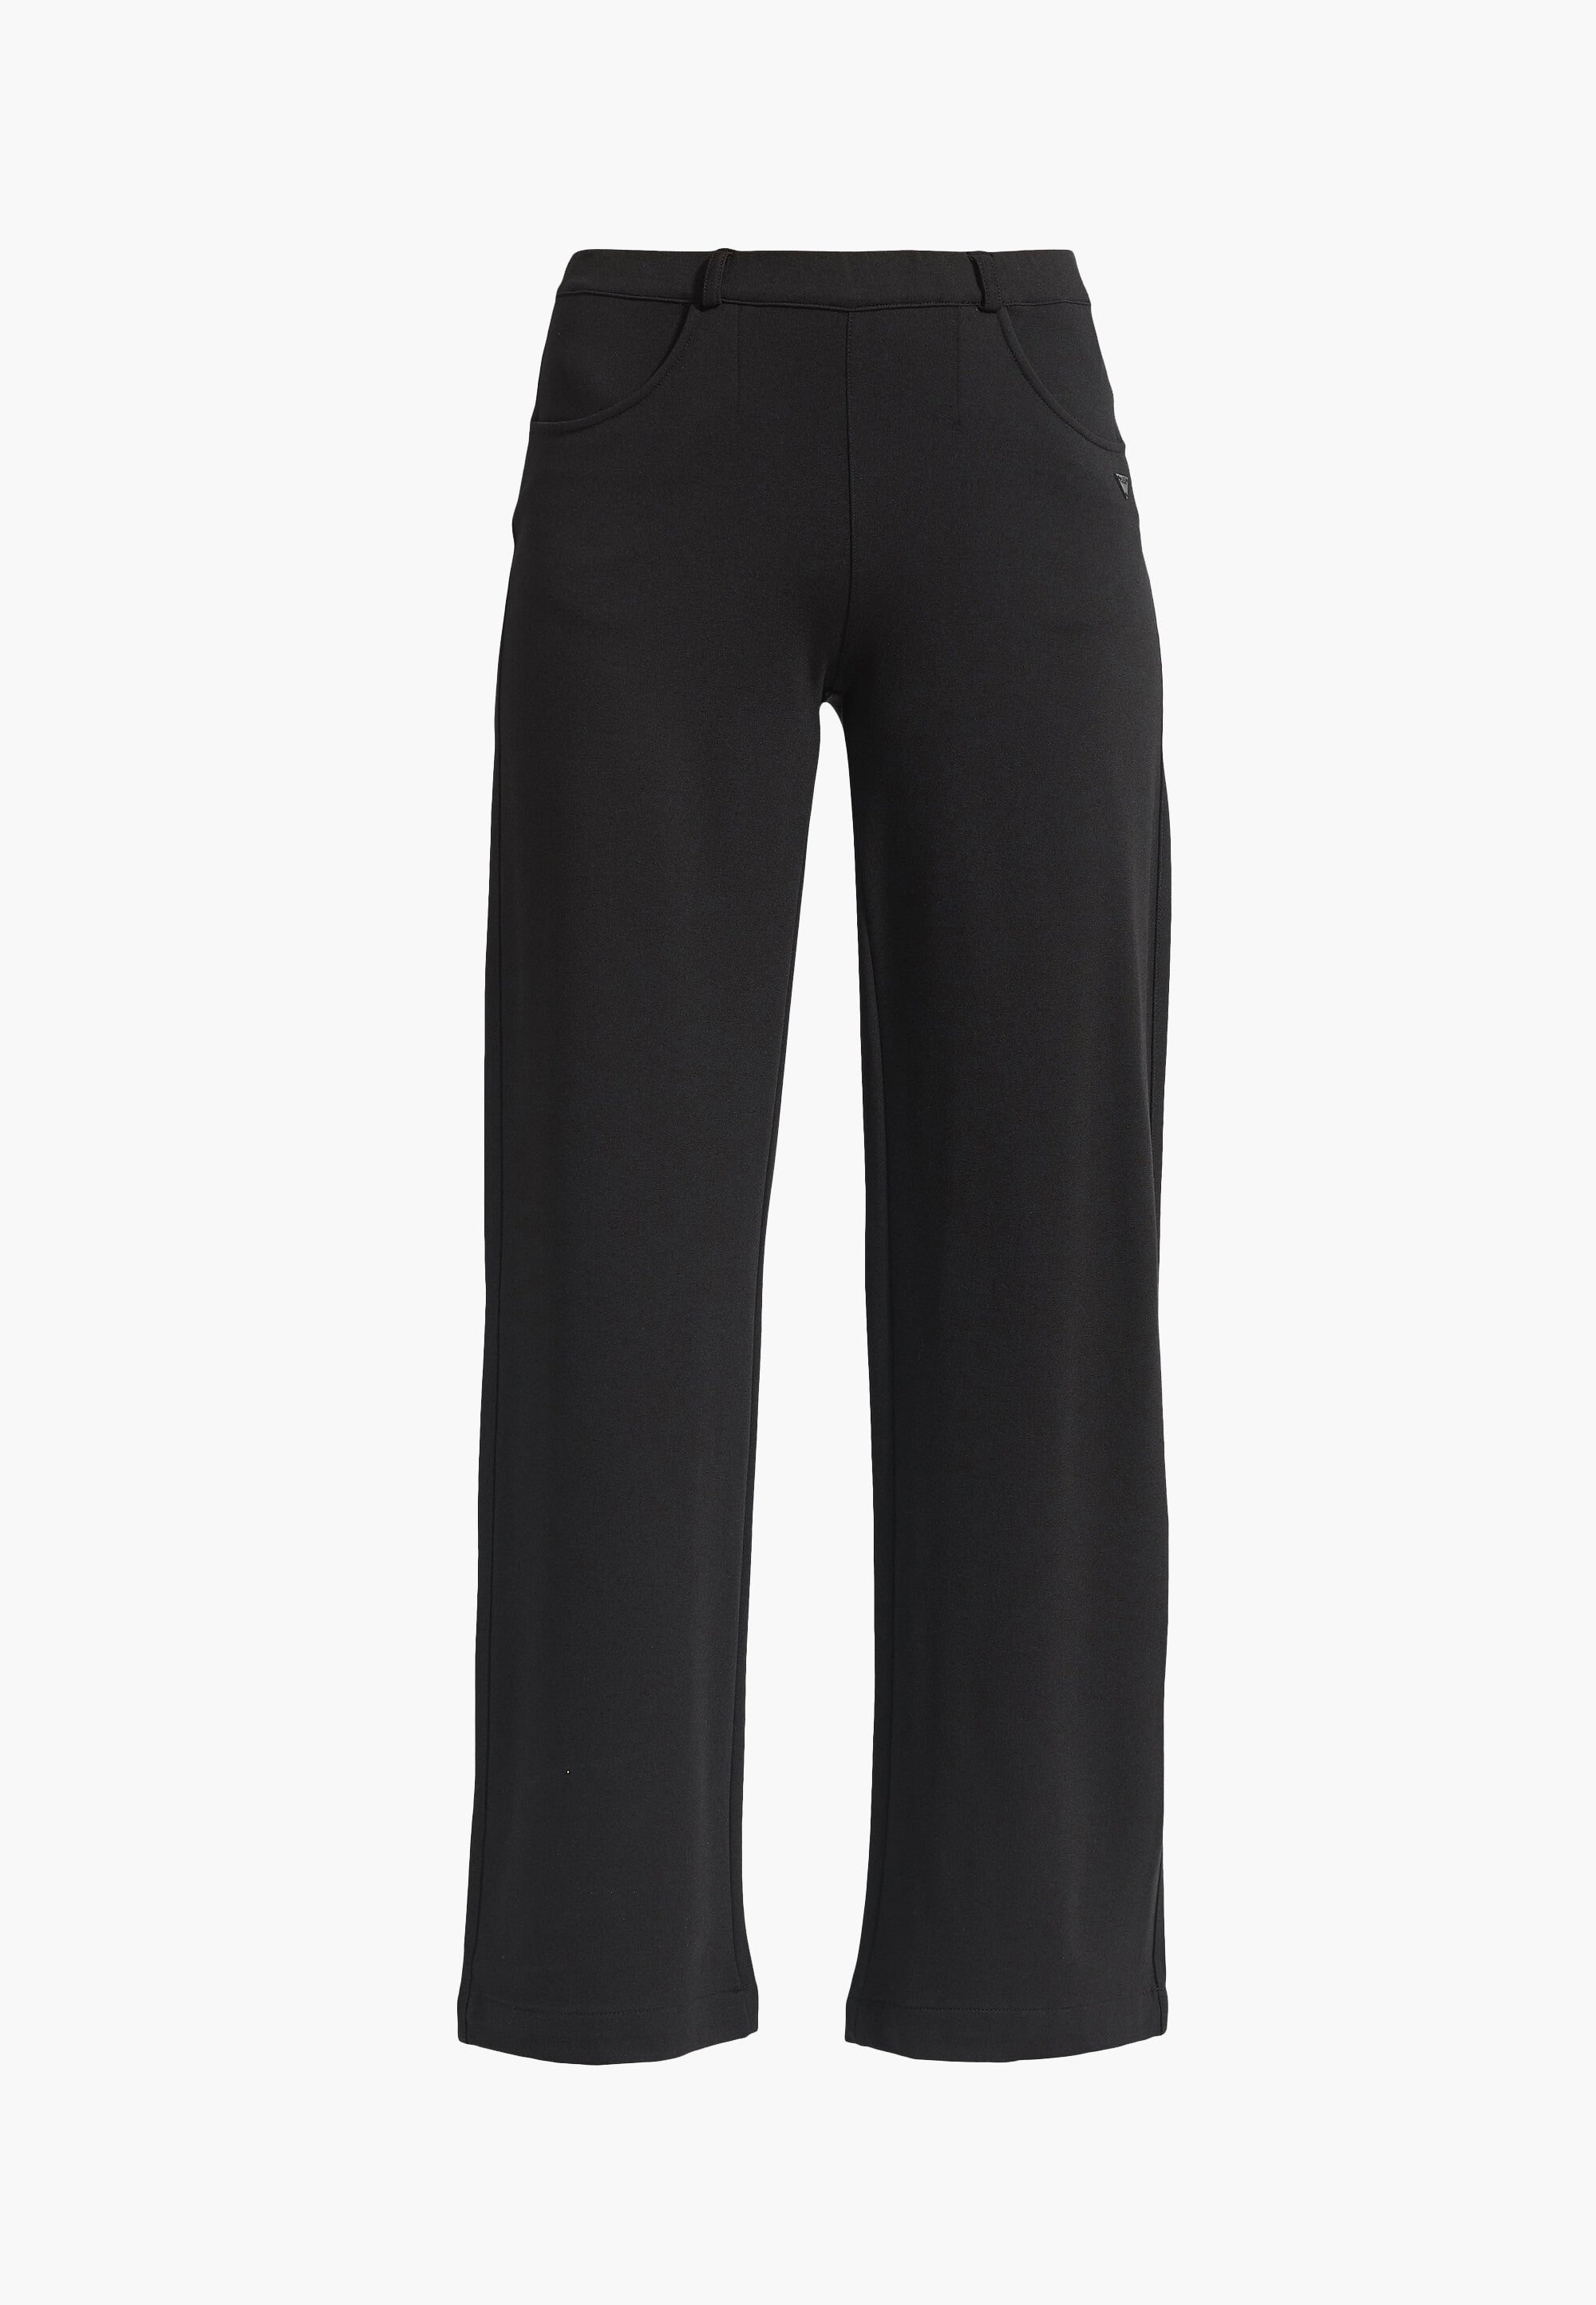 LAURIE  Donna Loose Jersey - Medium Length Trousers LOOSE 99143 Black brushed